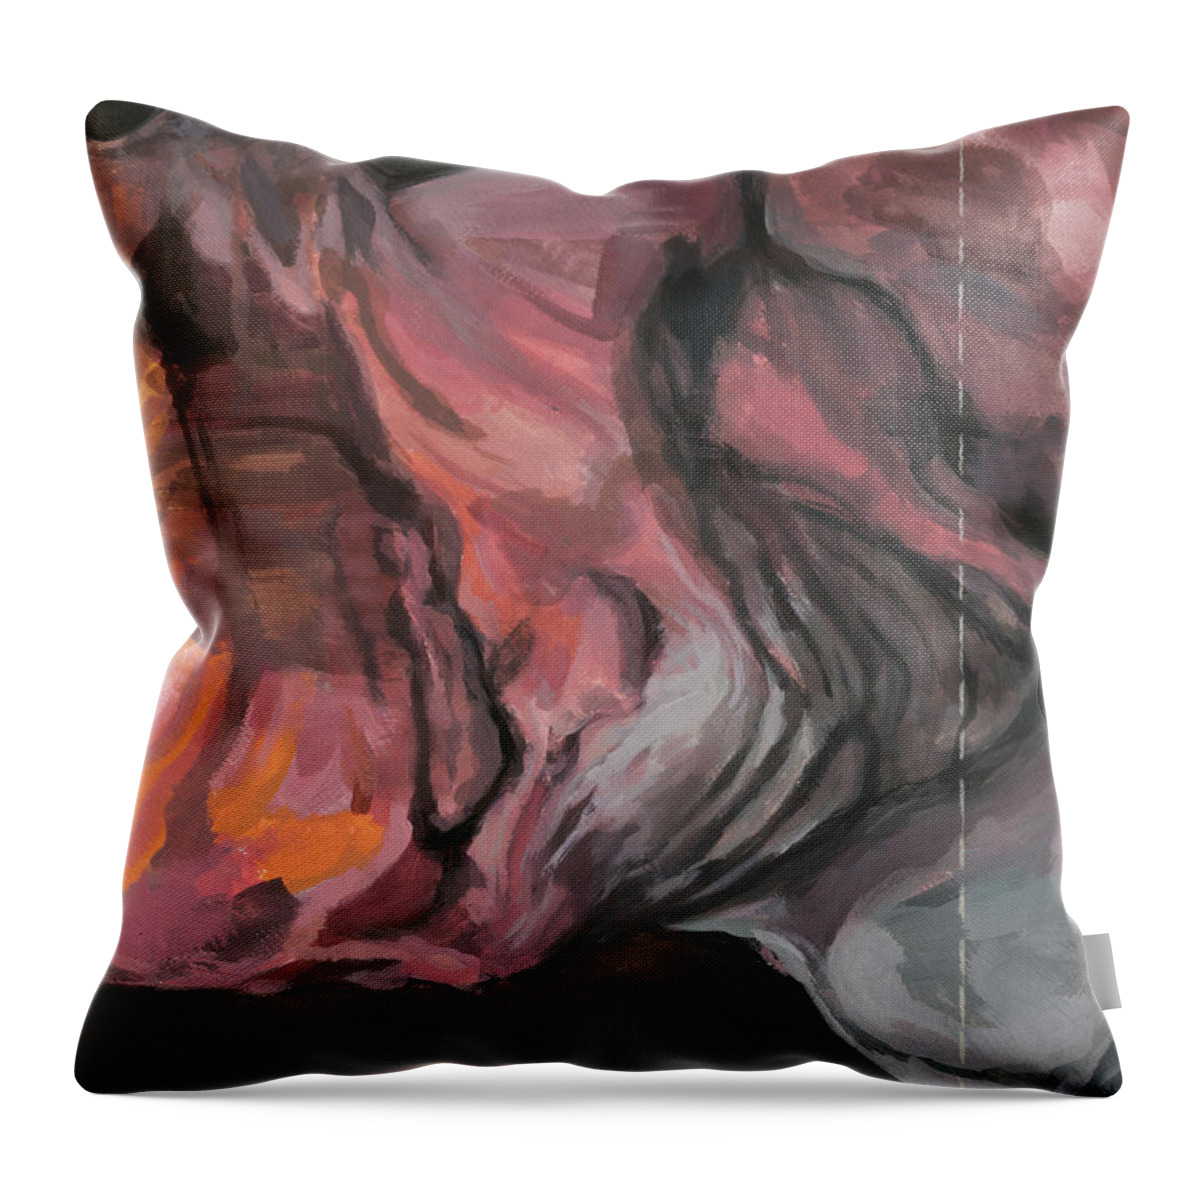 #portrait Throw Pillow featuring the painting Head Study 76 by Veronica Huacuja